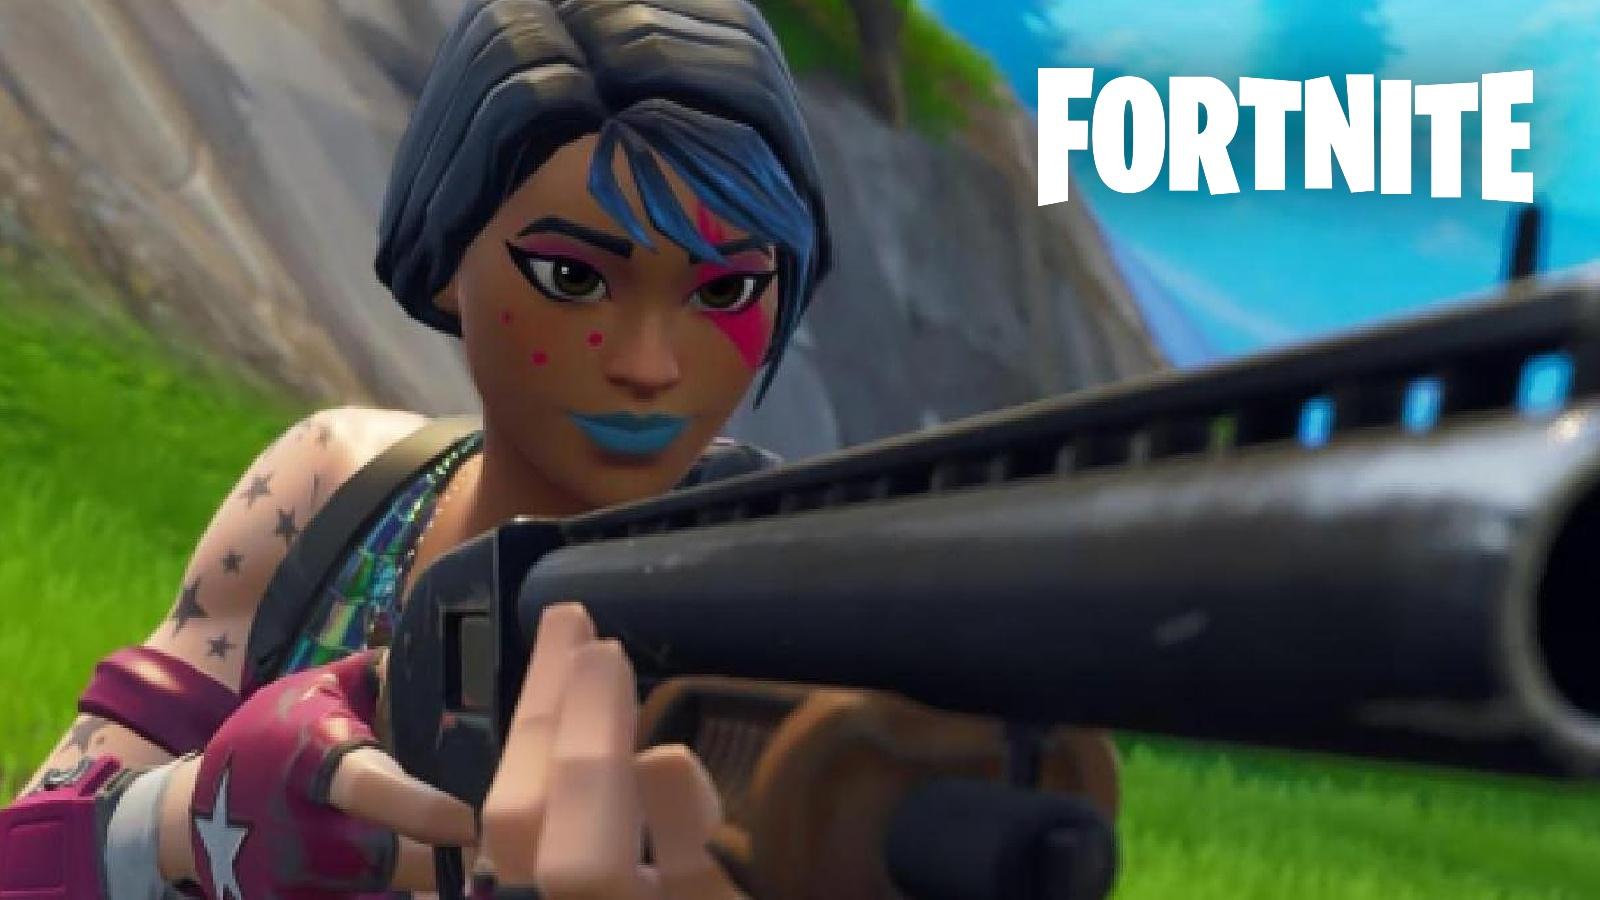 Fortnite Chapter 2 Player Skins - Hold To Reset